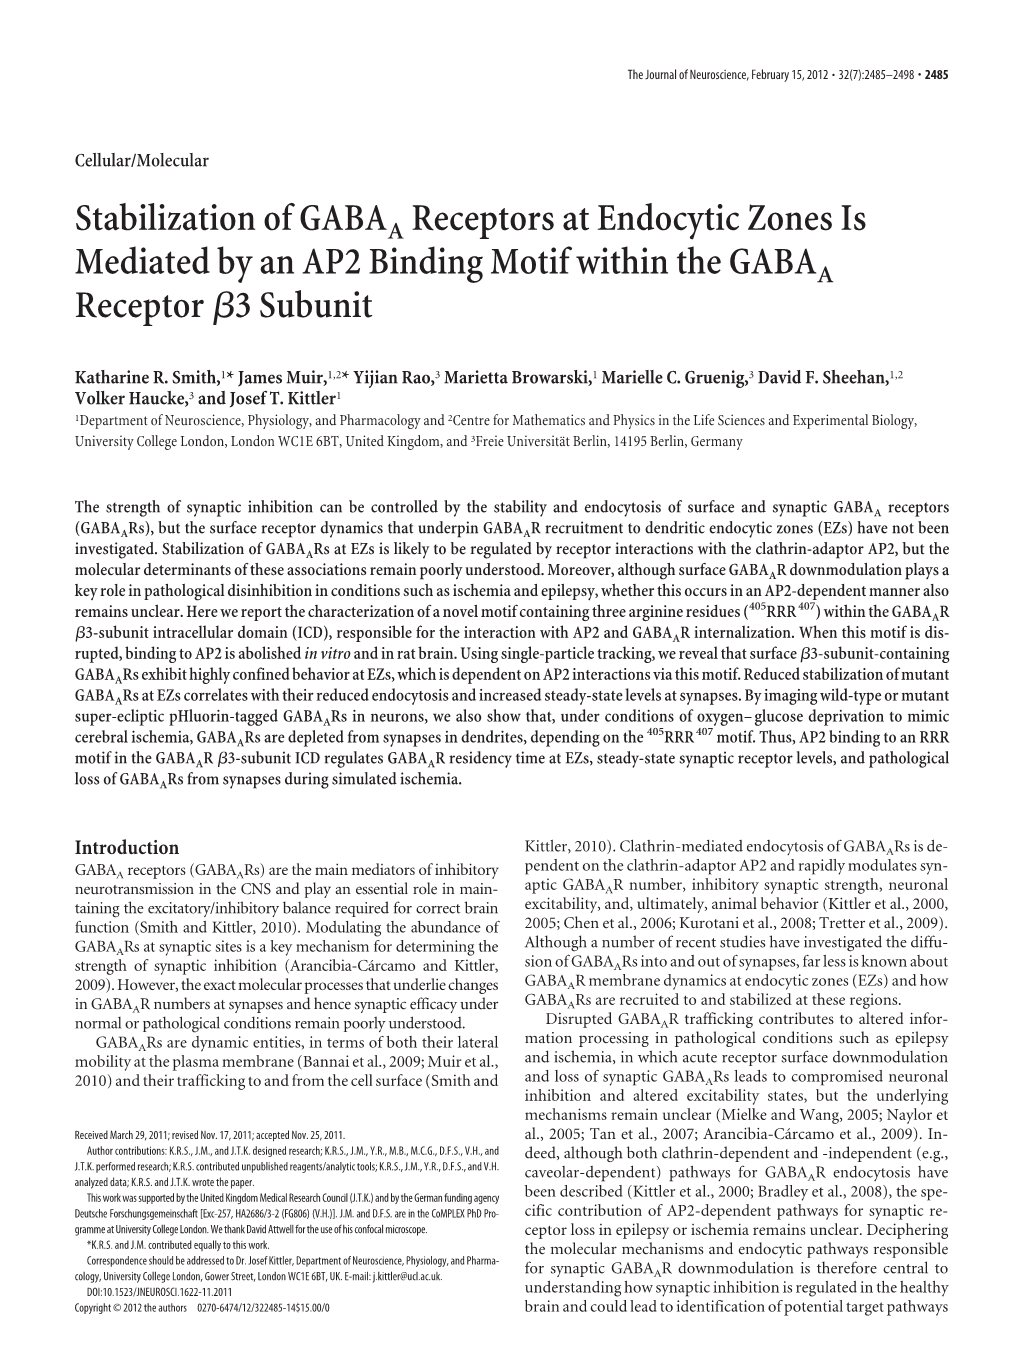 Stabilization of GABAA Receptors at Endocytic Zones Is Mediated by an AP2 Binding Motif Within the GABAA Receptor ␤3 Subunit